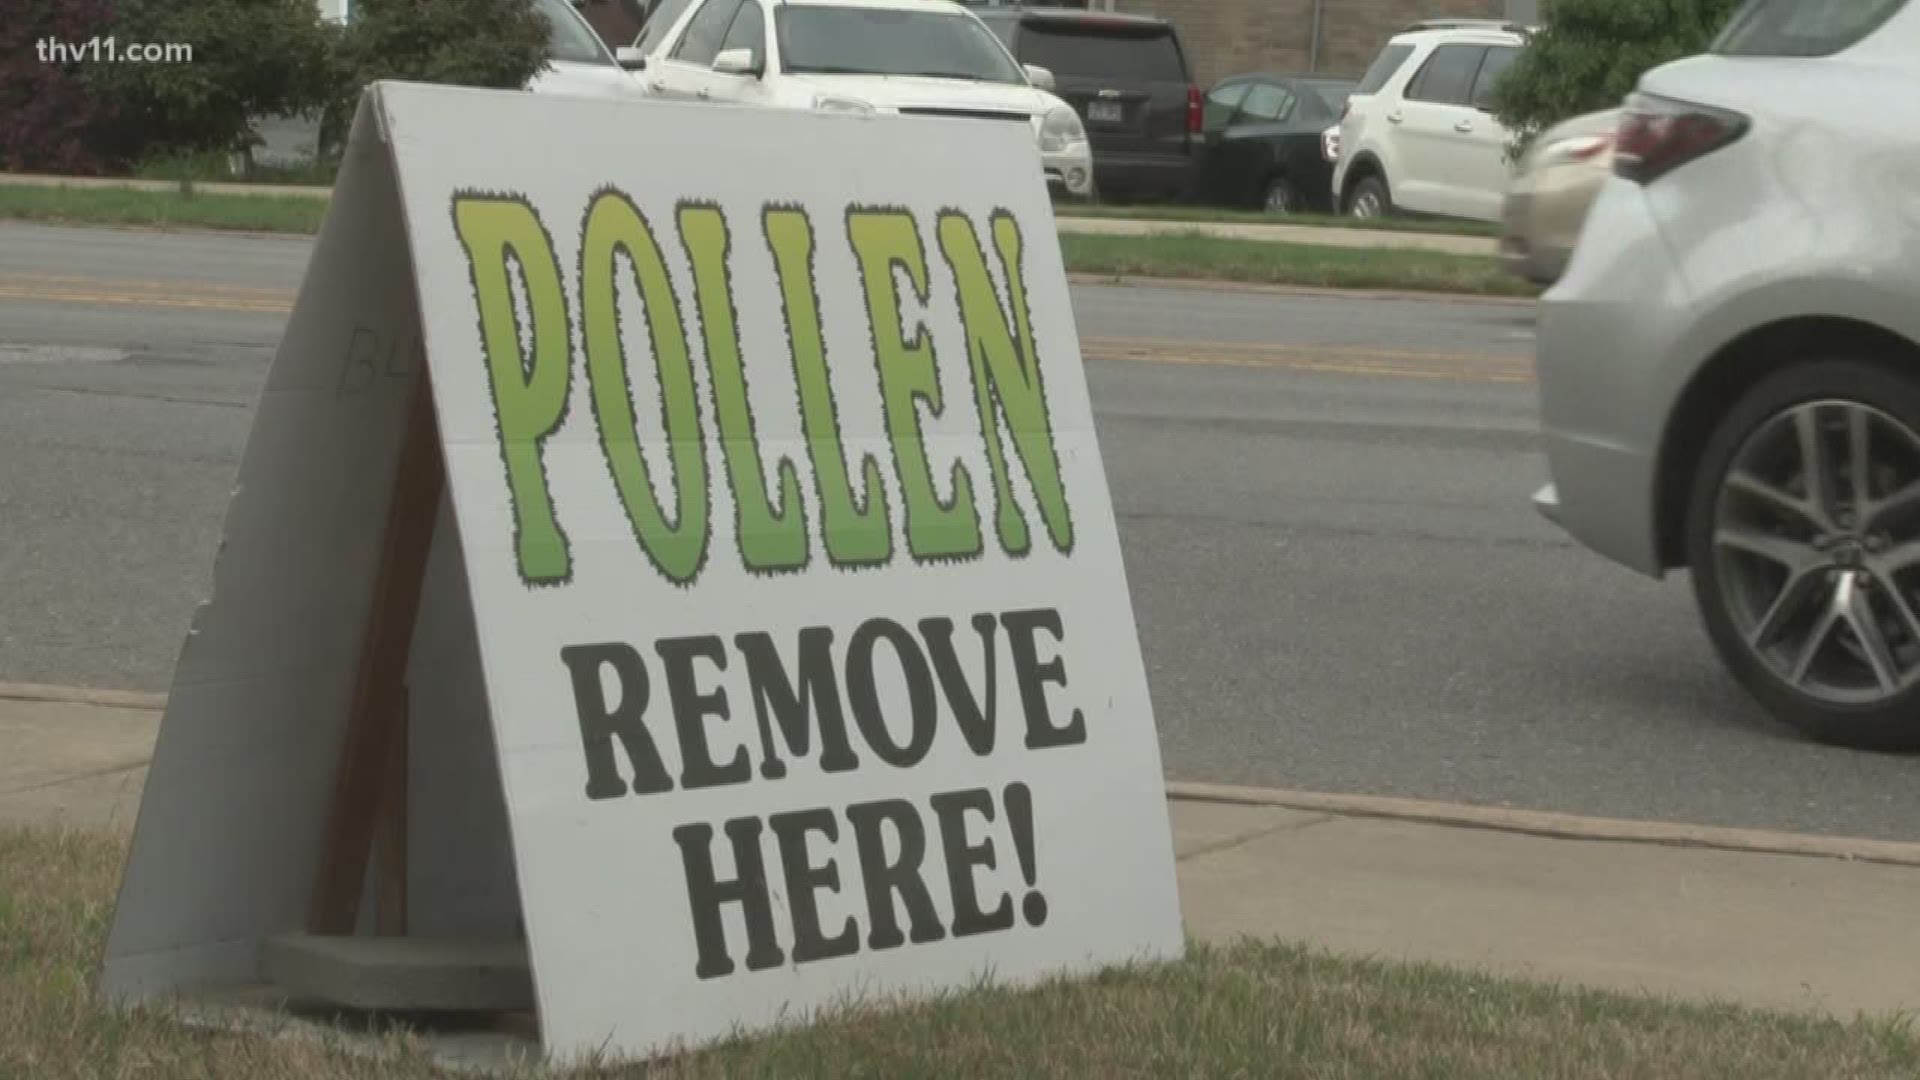 Pollen is all over the place in Arkansas.